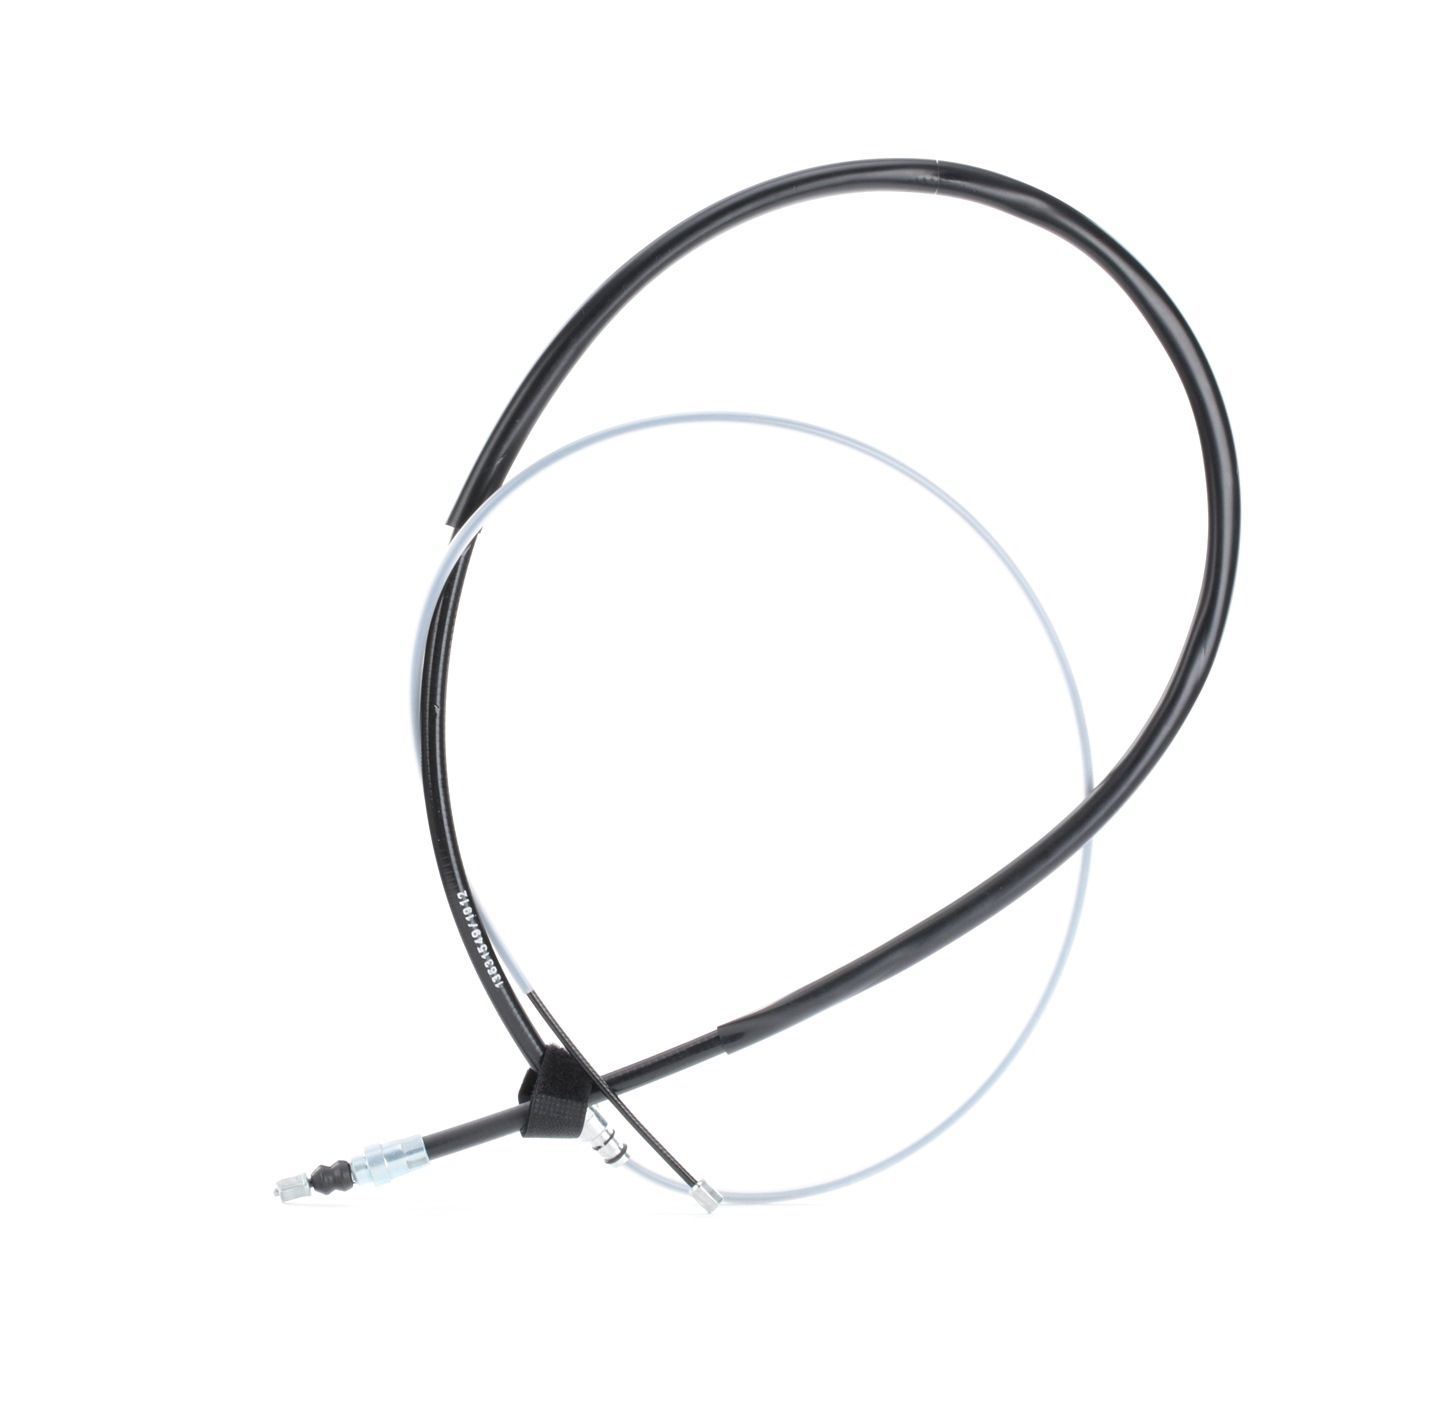 RIDEX 124C0210 Hand brake cable Rear, Left, Right, 2020/1080mm, Disc Brake, for parking brake